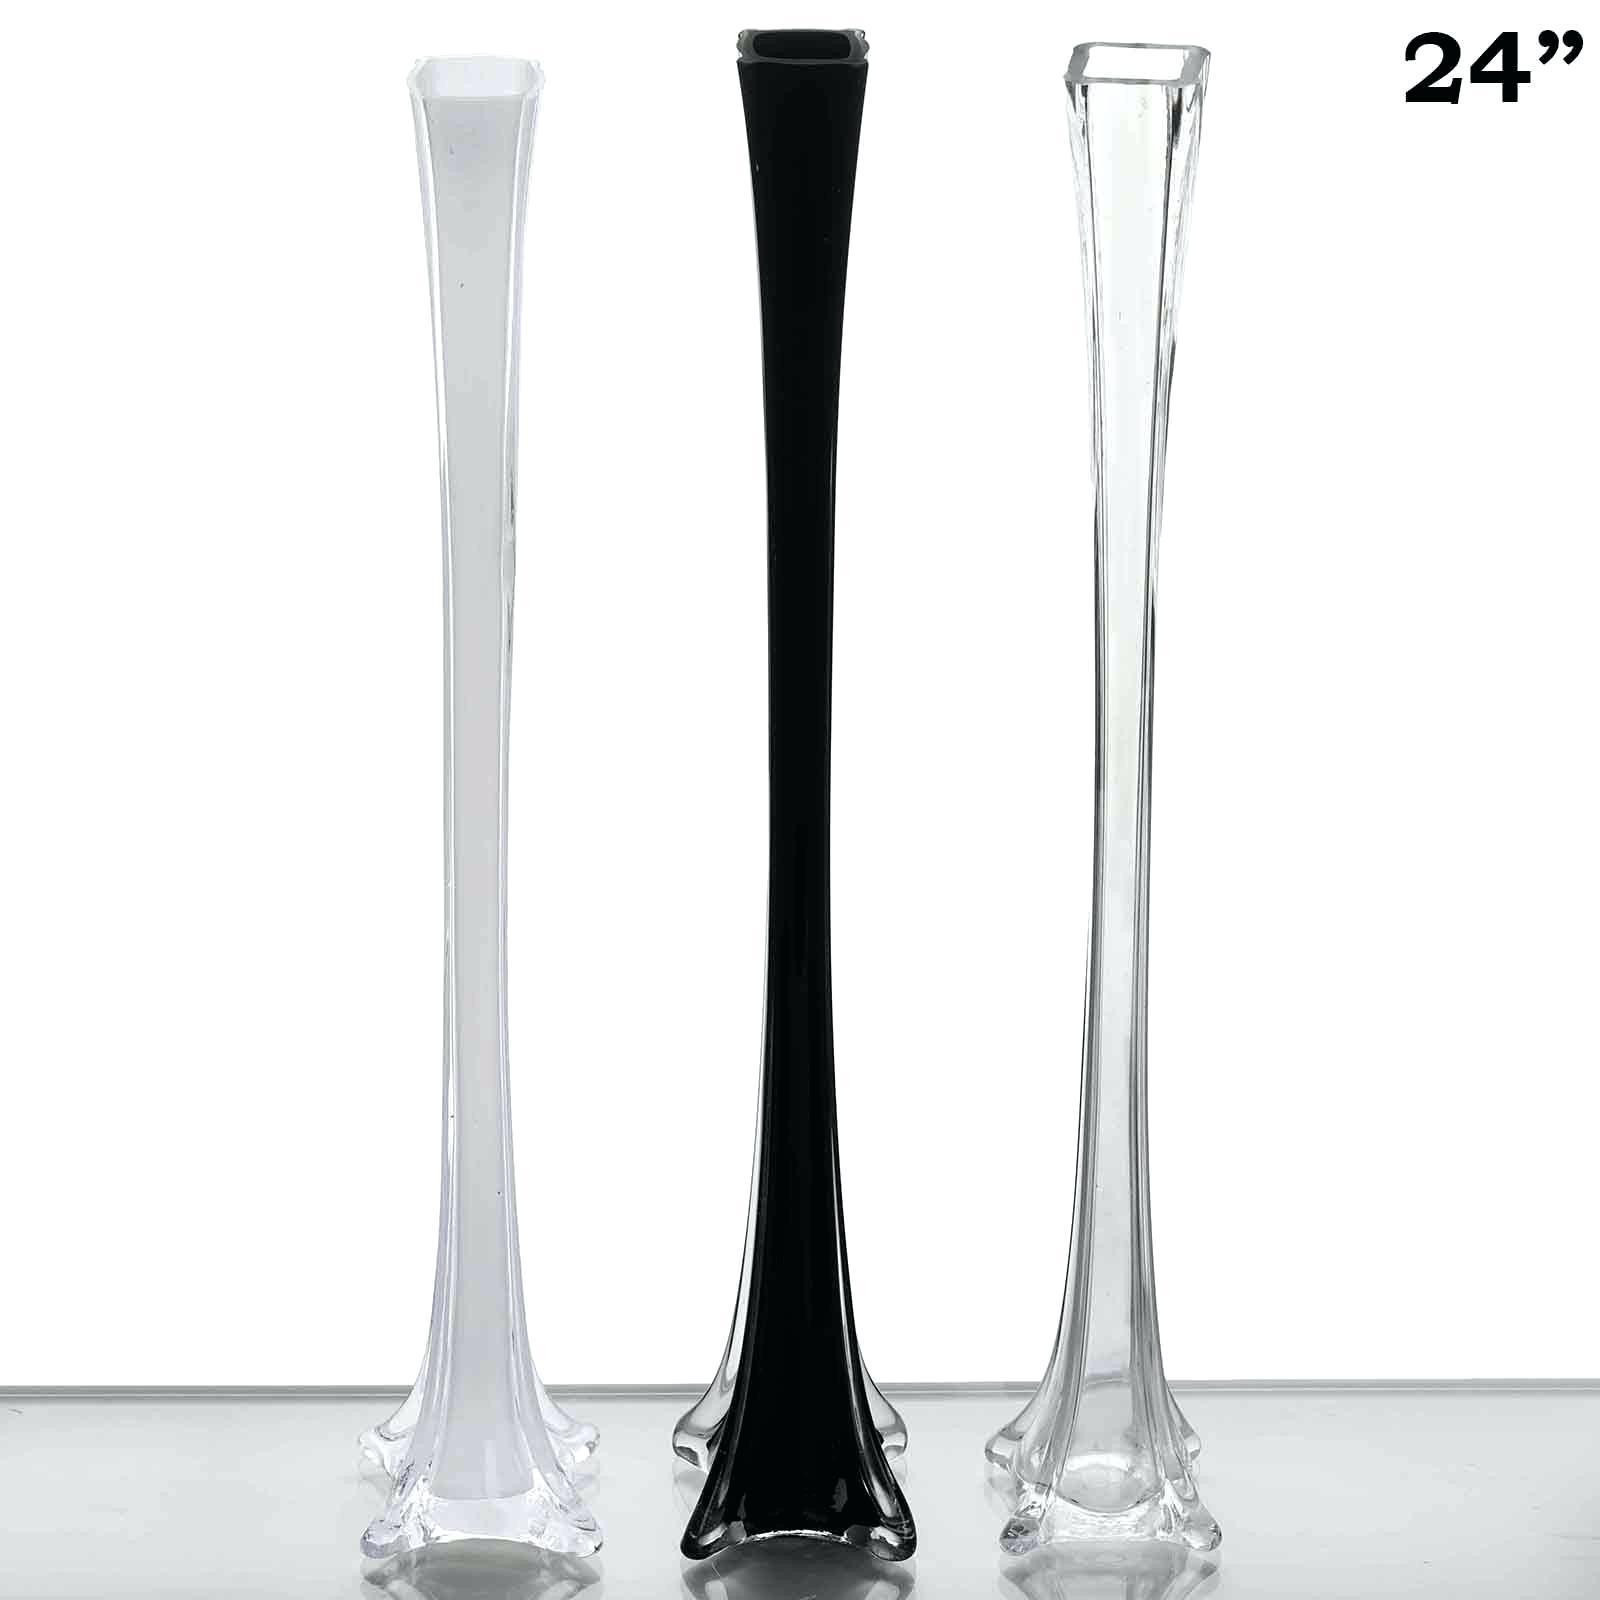 11 attractive 24 Glass Vases wholesale 2024 free download 24 glass vases wholesale of glass vases with lids collection 24 inch vases bulk 23 5 flared with glass vases with lids images fantastic chair decor ideas from living room vases wholesale awe